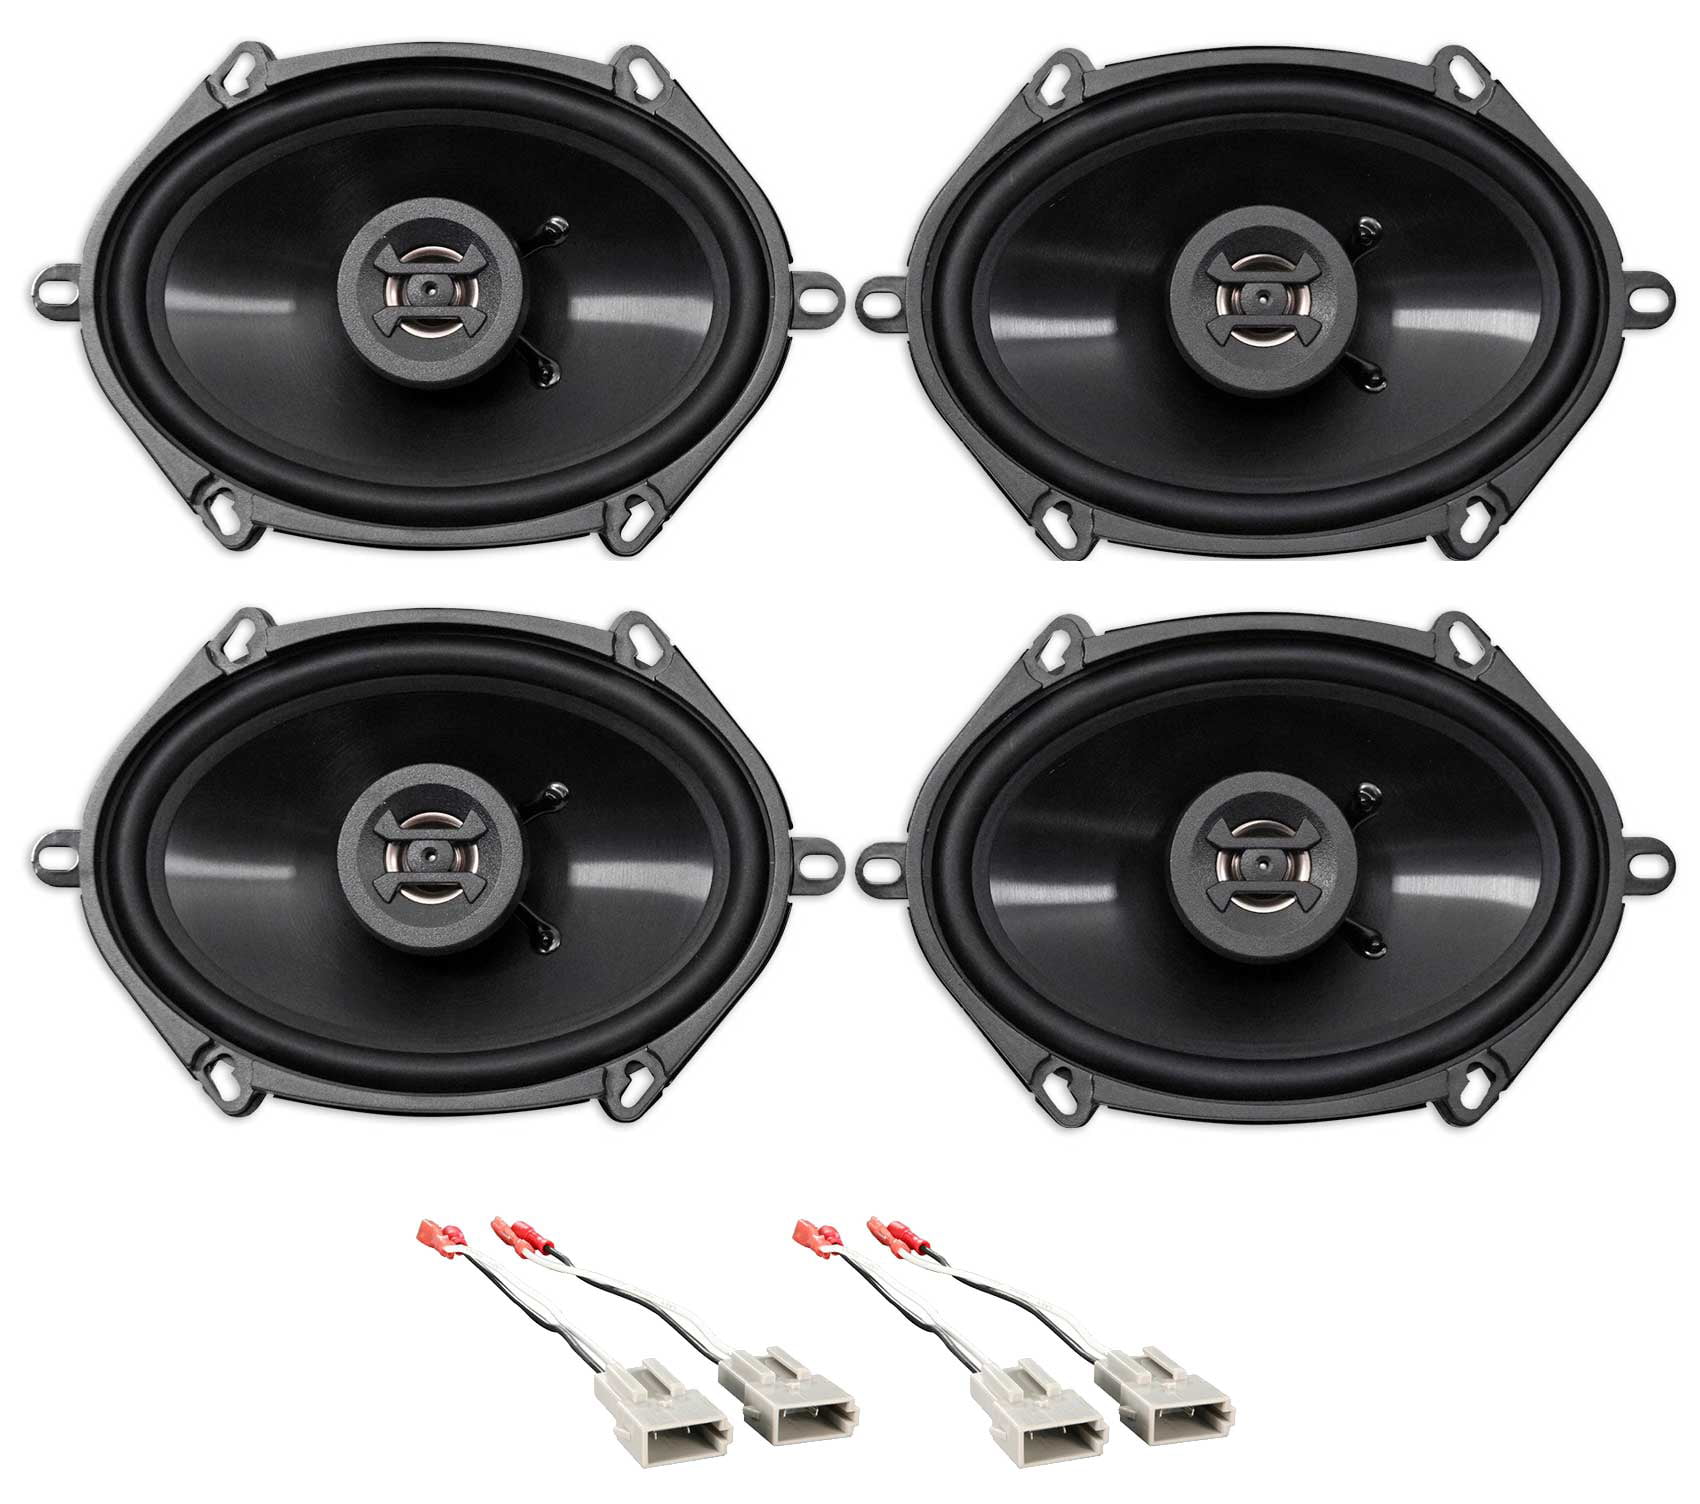 Kicker 6x8" Front+Rear Car Speaker Replacement Kit For 1995-2003 Ford Windstar